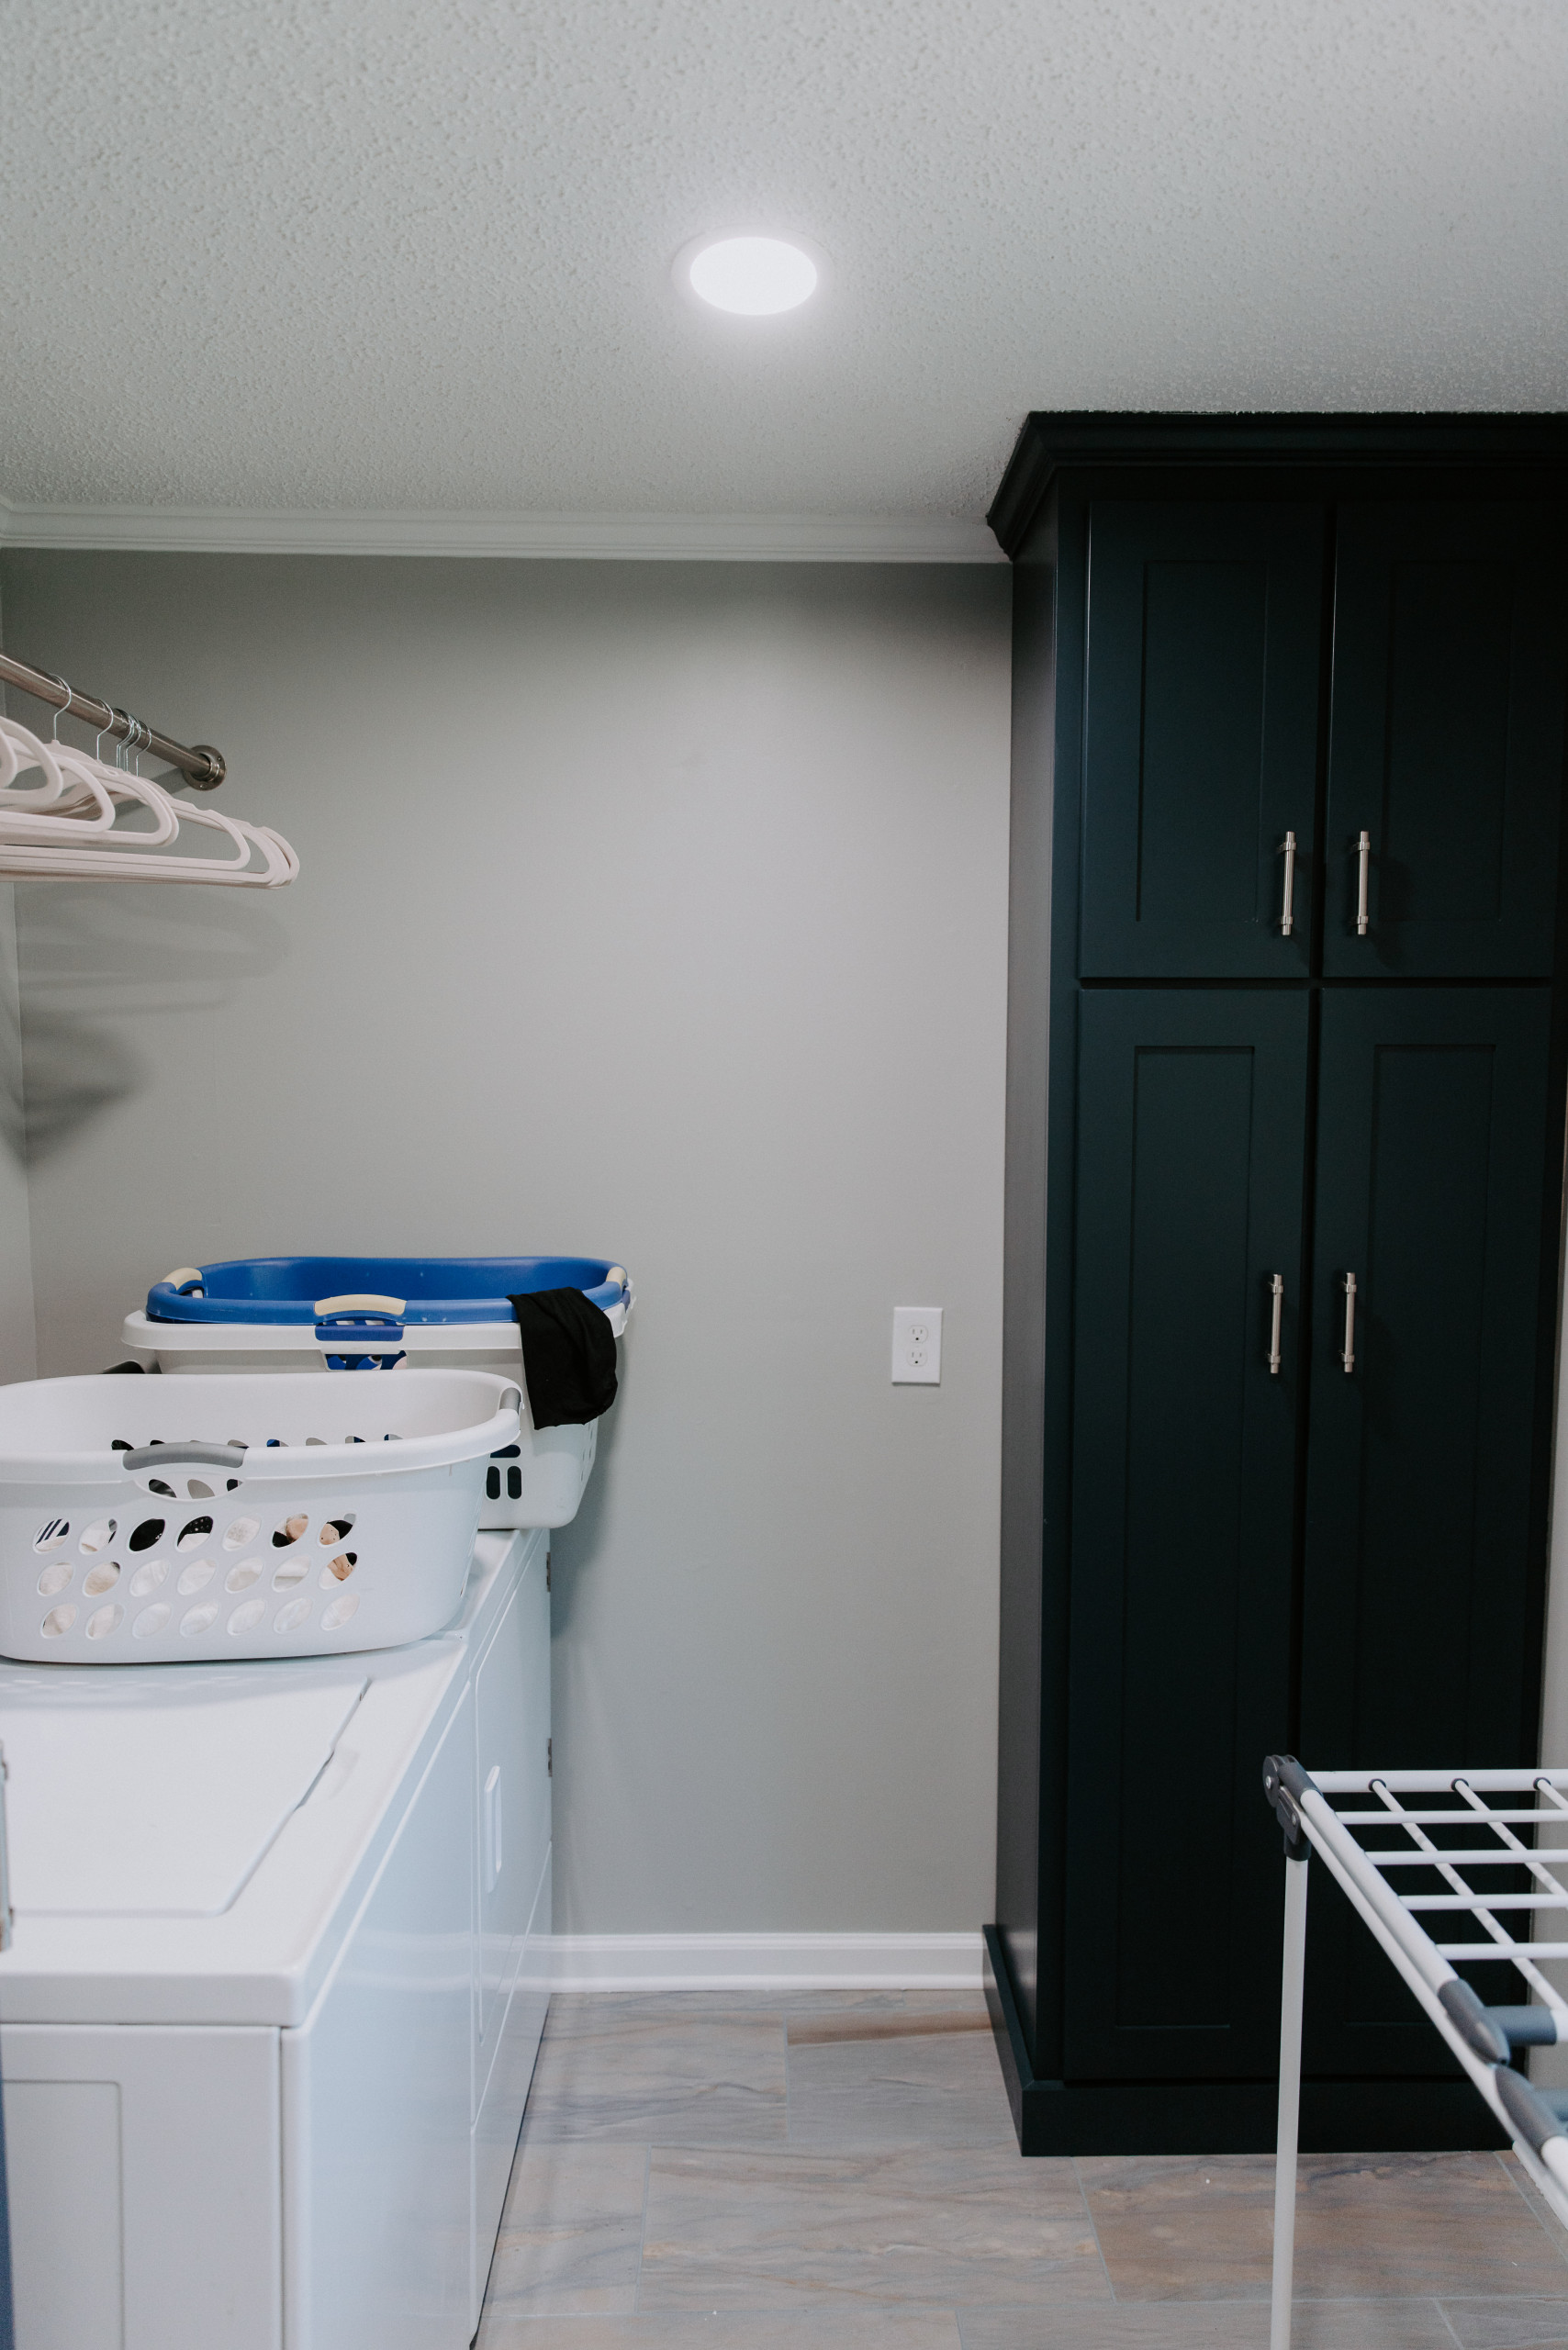 Built-ins + Mudroom\ Laundry Room Remodel